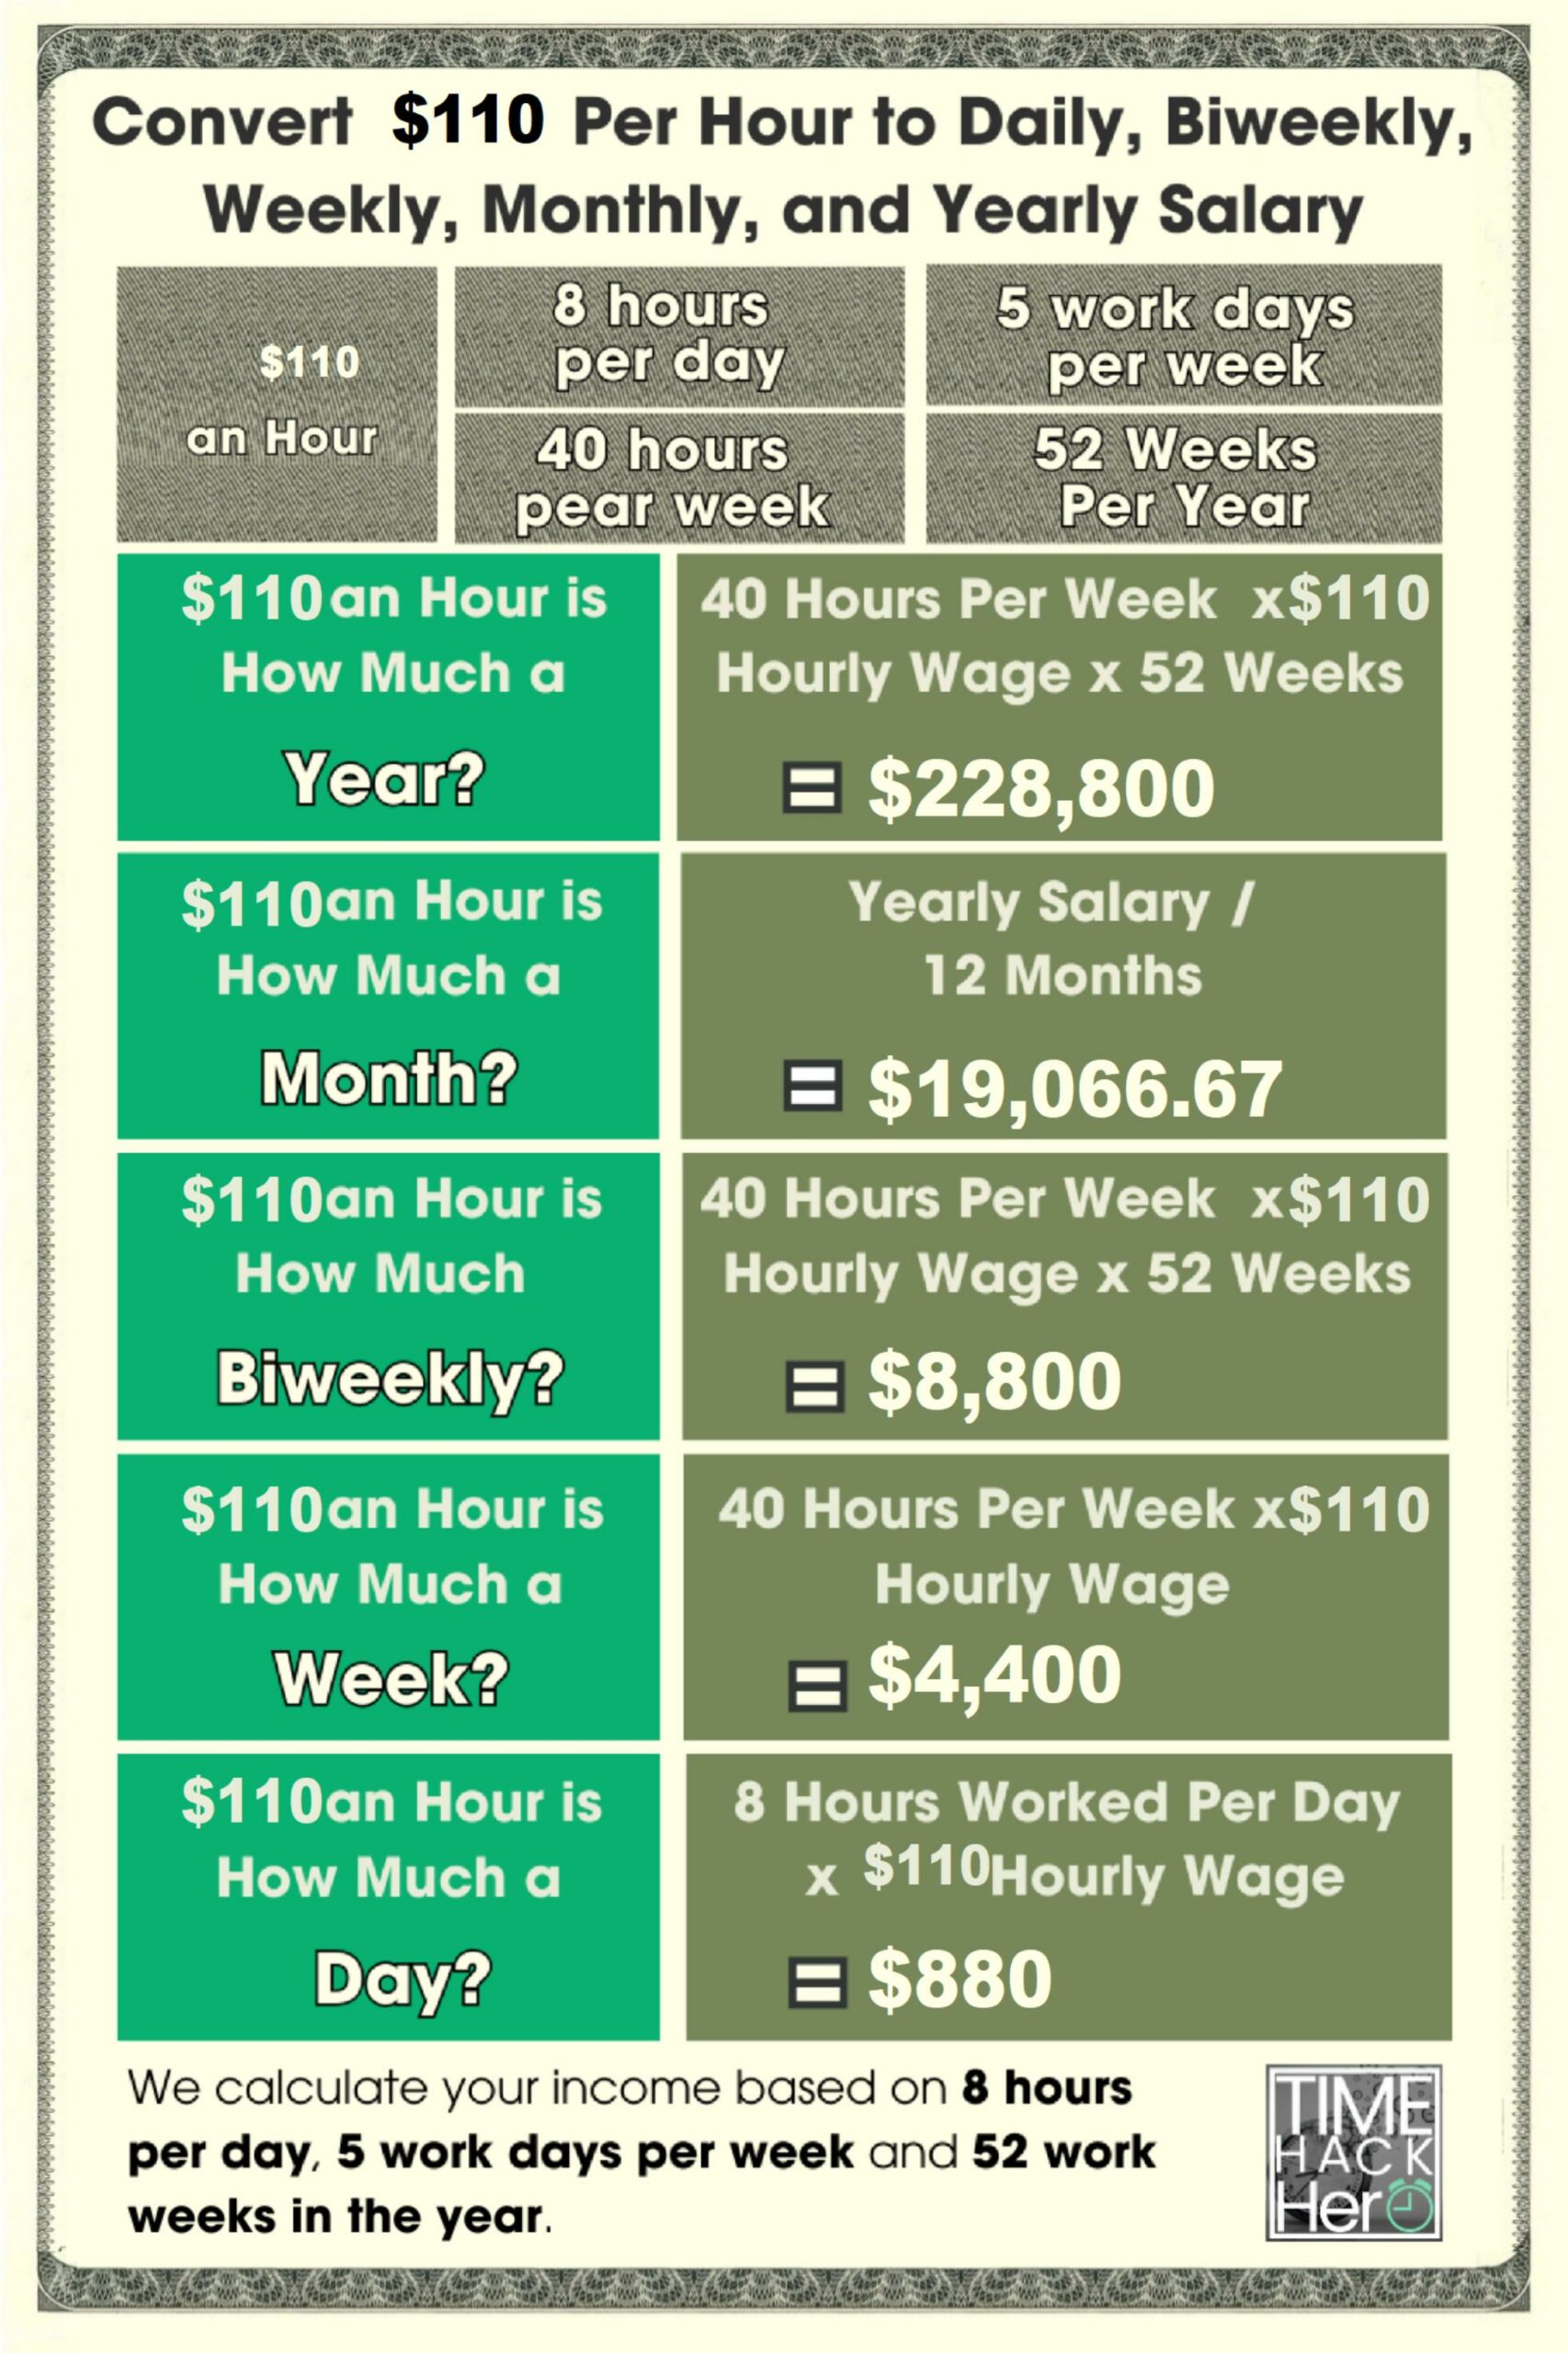 Convert $110 Per Hour to Weekly, Monthly, and Yearly Salary